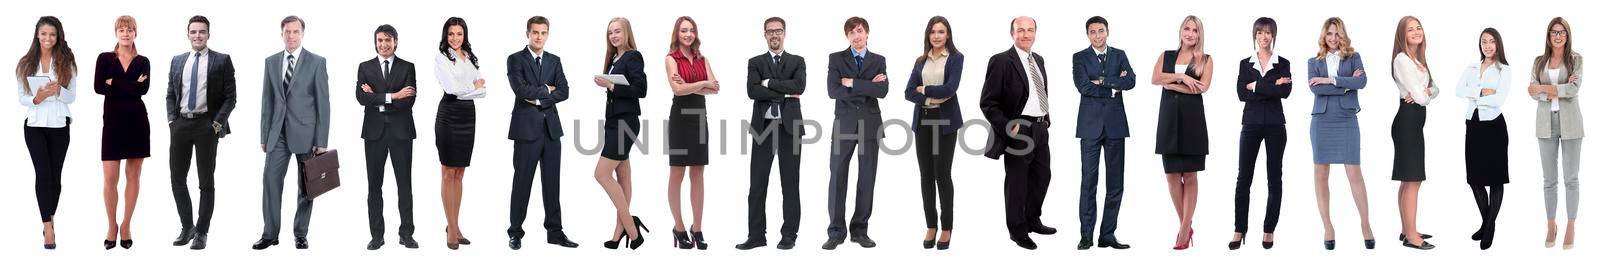 Young attractive business people - the elite business team by asdf